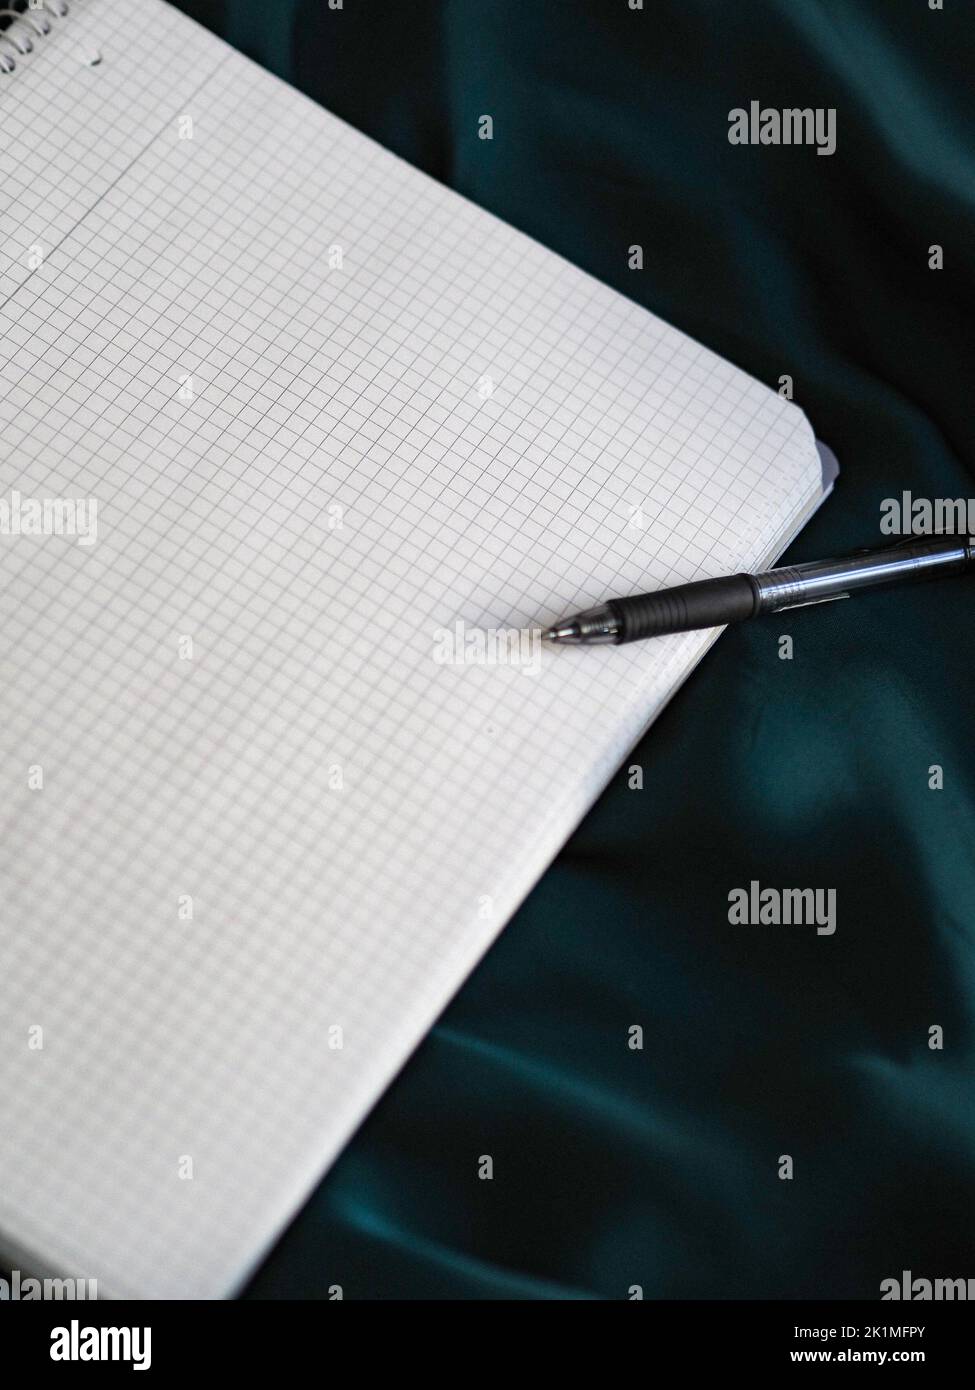 A pen and graphing paper on a shiny blue fabric surface, vertical shot Stock Photo